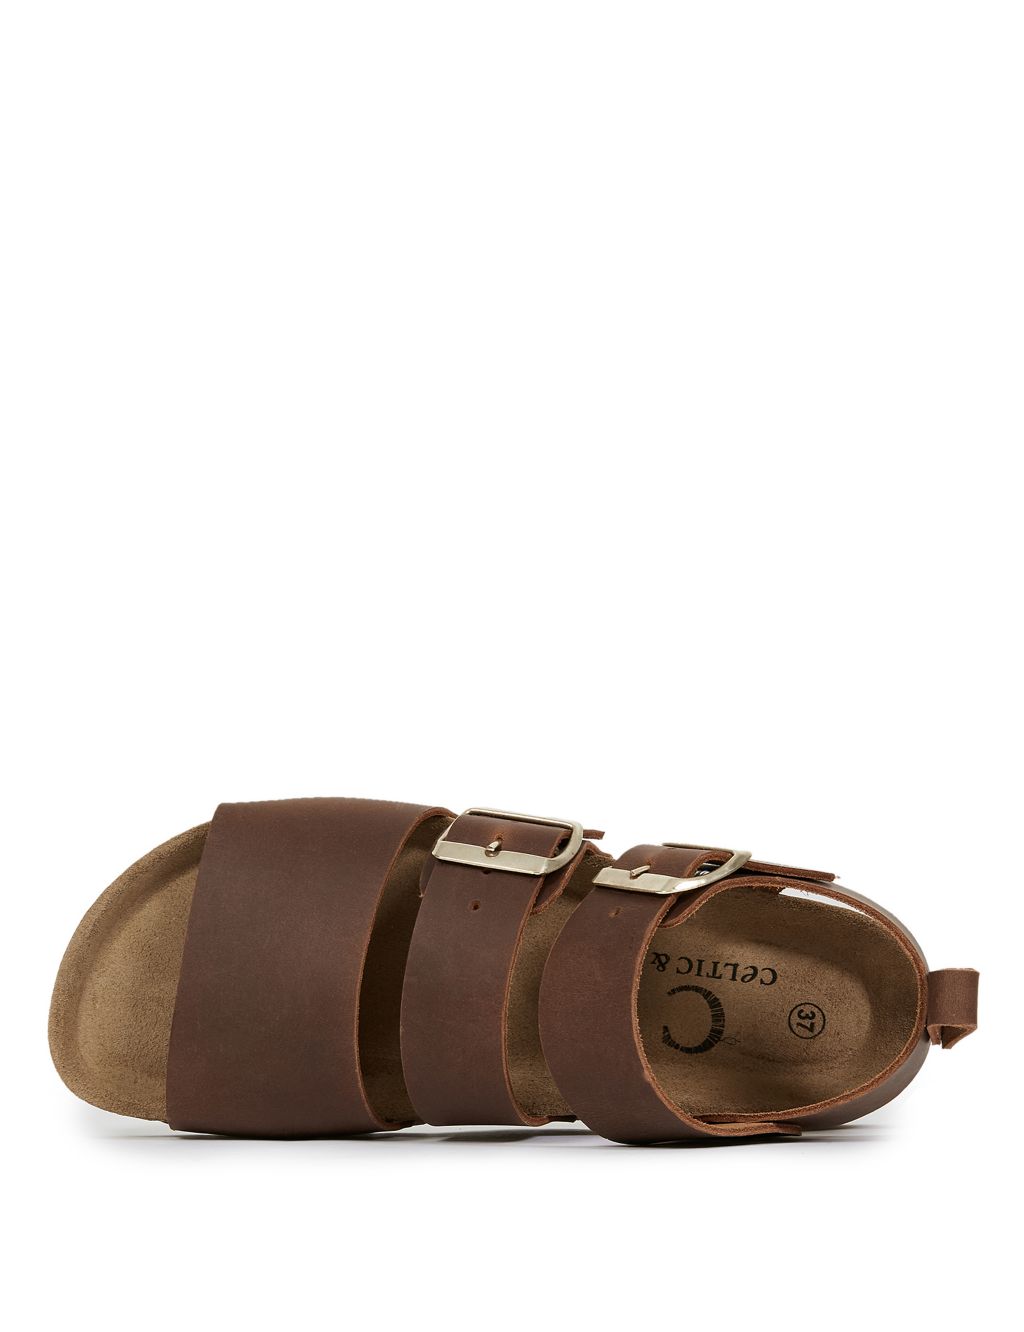 Buy Leather Buckle Ankle Strap Flat Sandals | Celtic & Co. | M&S